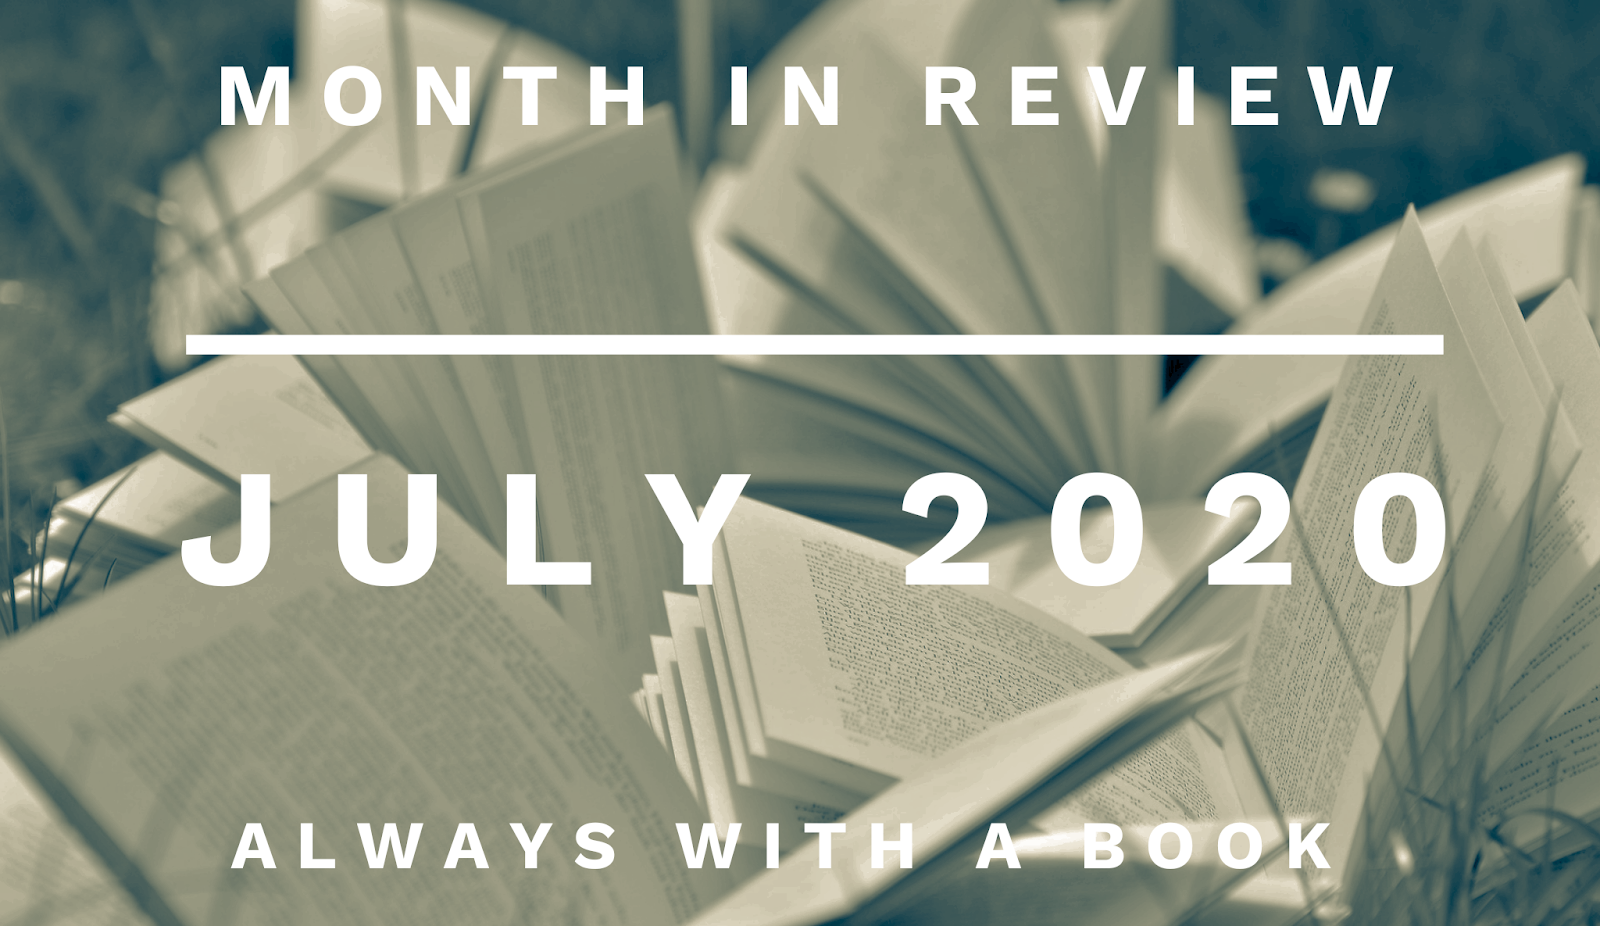 Month in Review: July 2020